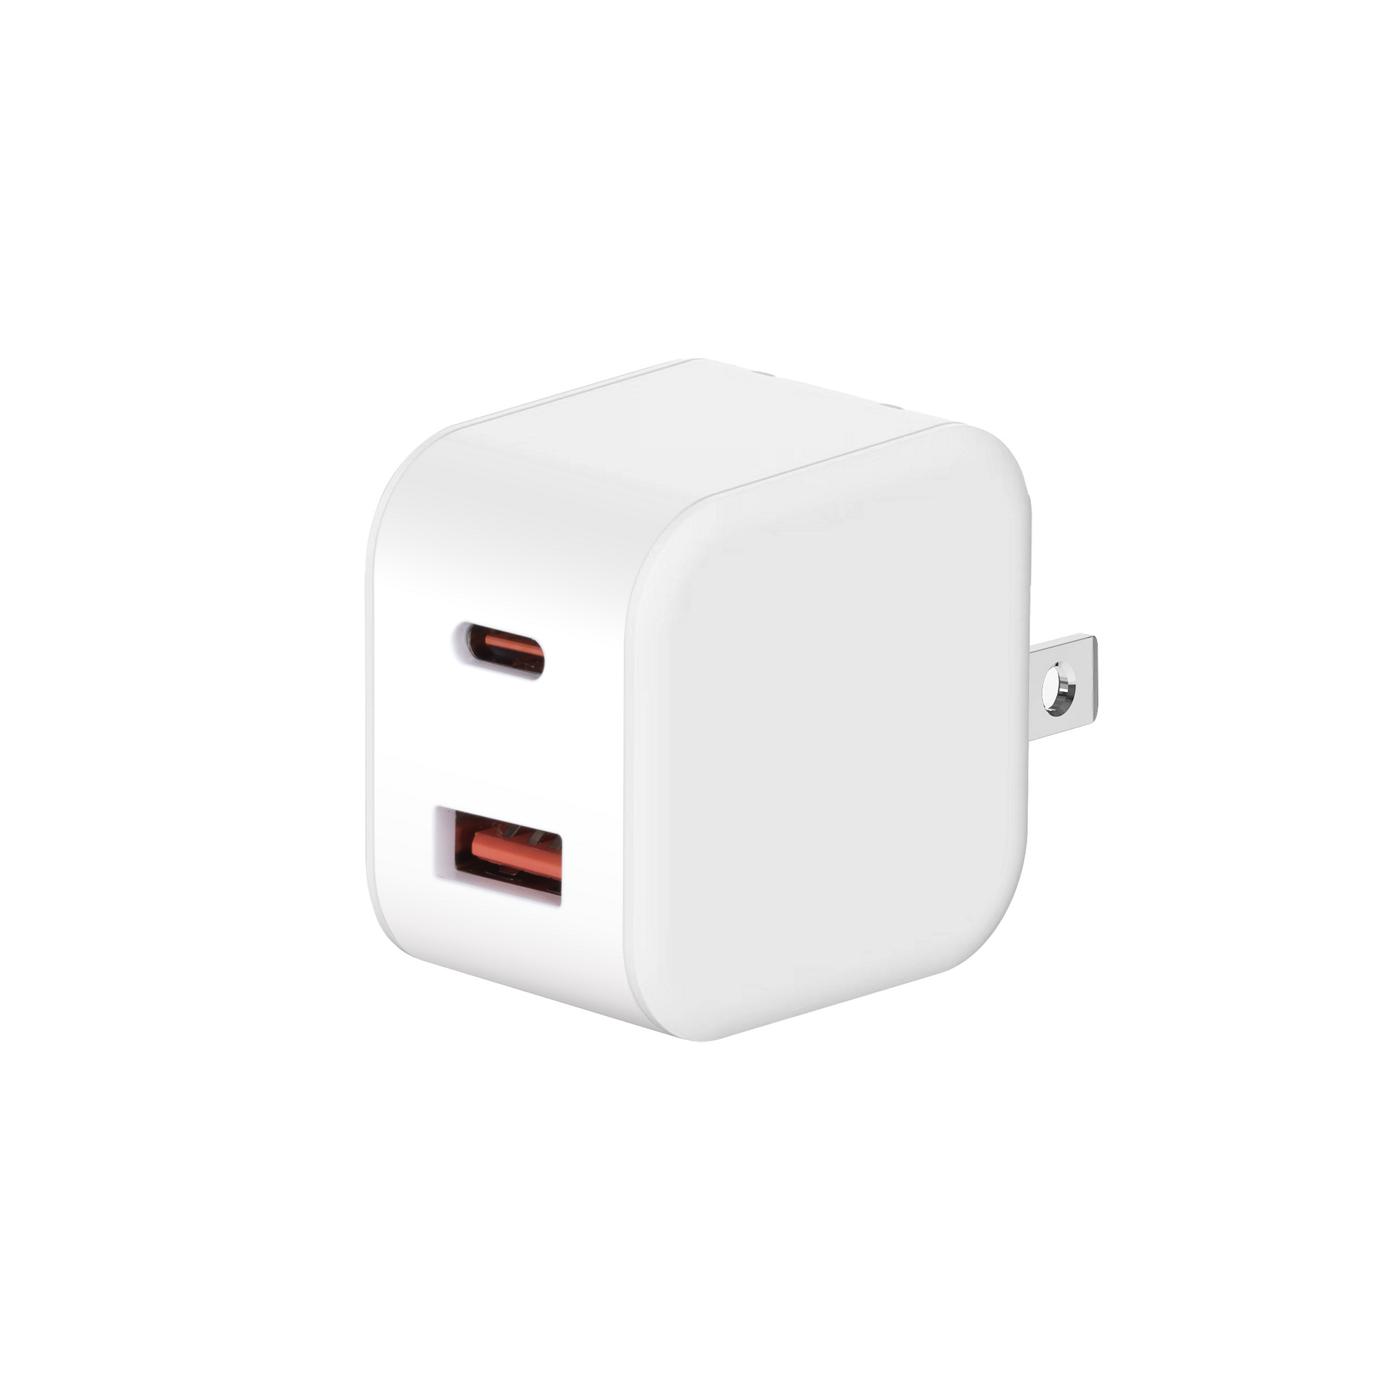 iHome Dual Port Rapid Wall Charger - White; image 2 of 2